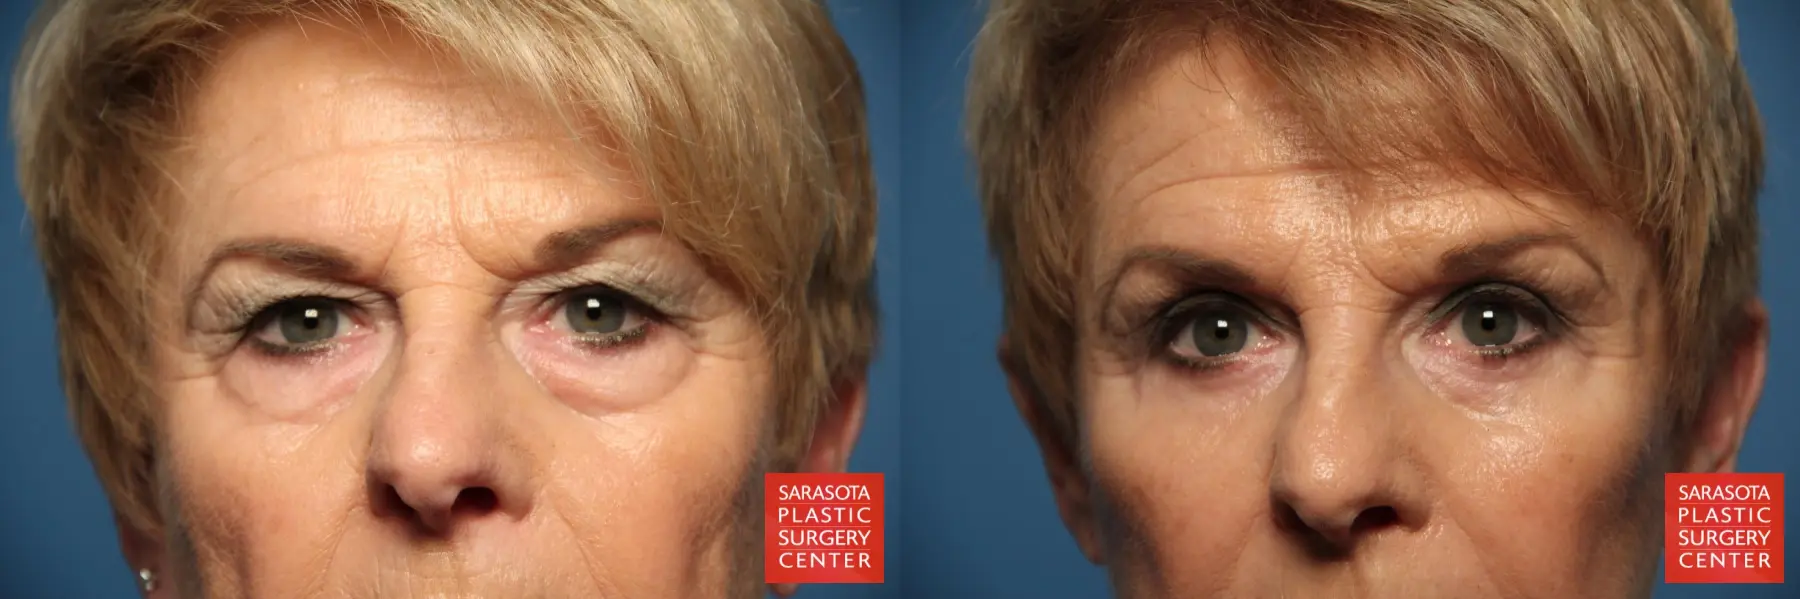 Eyelid Lift: Patient 11 - Before and After 1